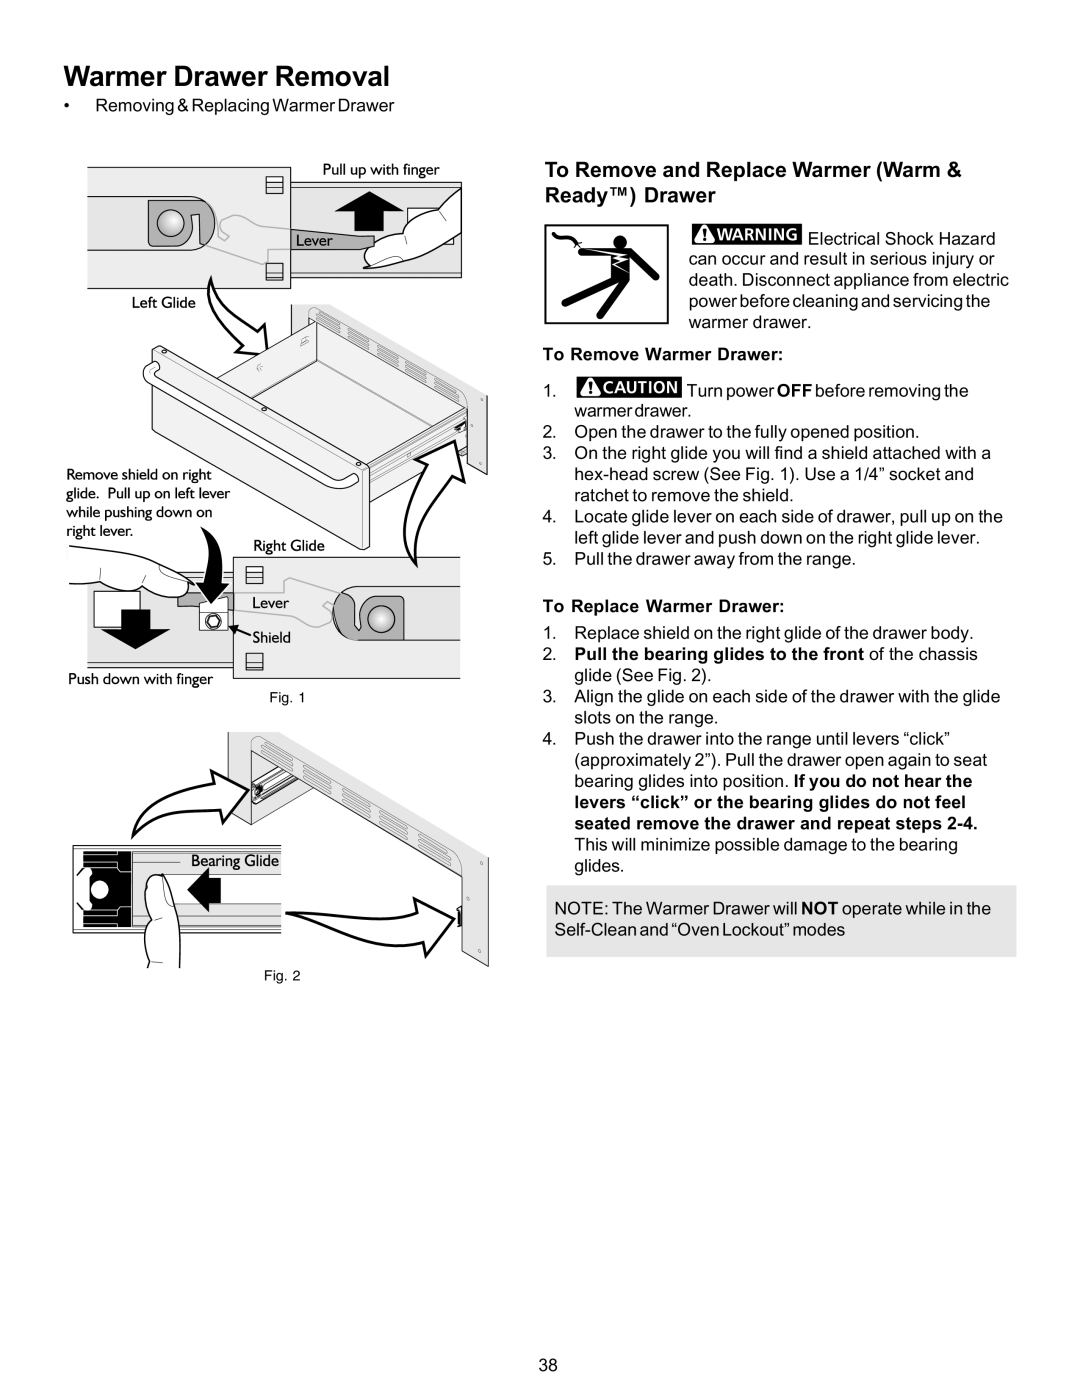 Kenmore 790-9663 manual Warmer Drawer Removal, To Remove and Replace Warmer Warm Ready Drawer, To Remove Warmer Drawer 